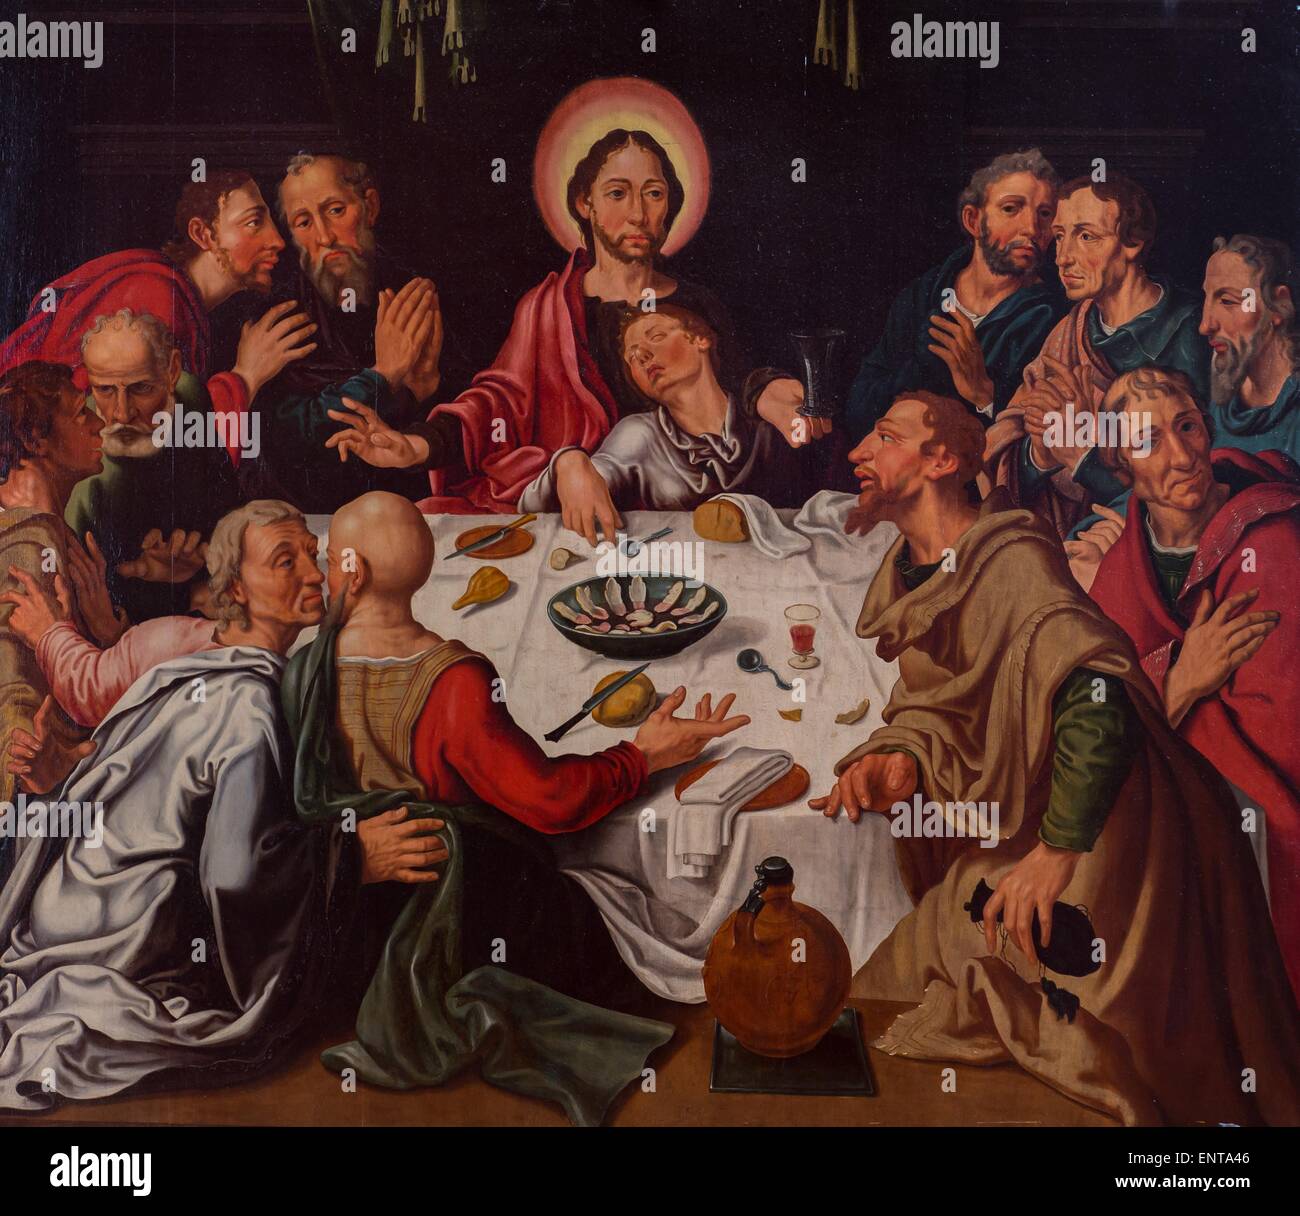 The last supper 18/09/2013 - Renaissance () Collection Stock Photo